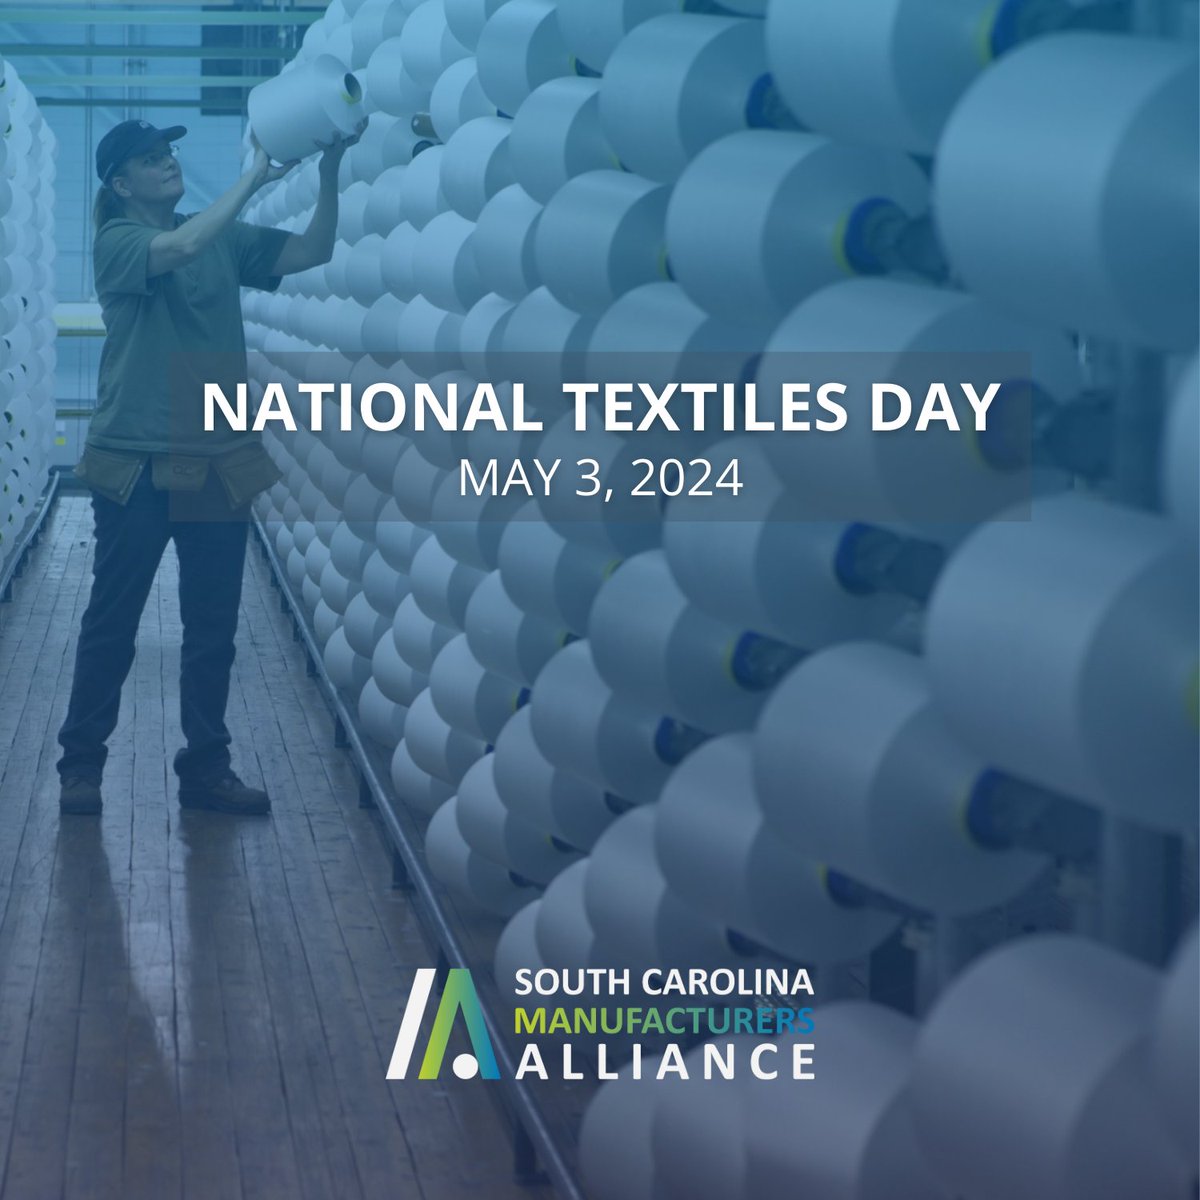 Today is #NationalTextilesDay! #DYK SCMA traces its roots to the Cotton Manufacturers Association, which was formed in 1902 to address the challenges of the region's rapidly growing textile industry? The textile industry has transformed SC and continues to create innovative…